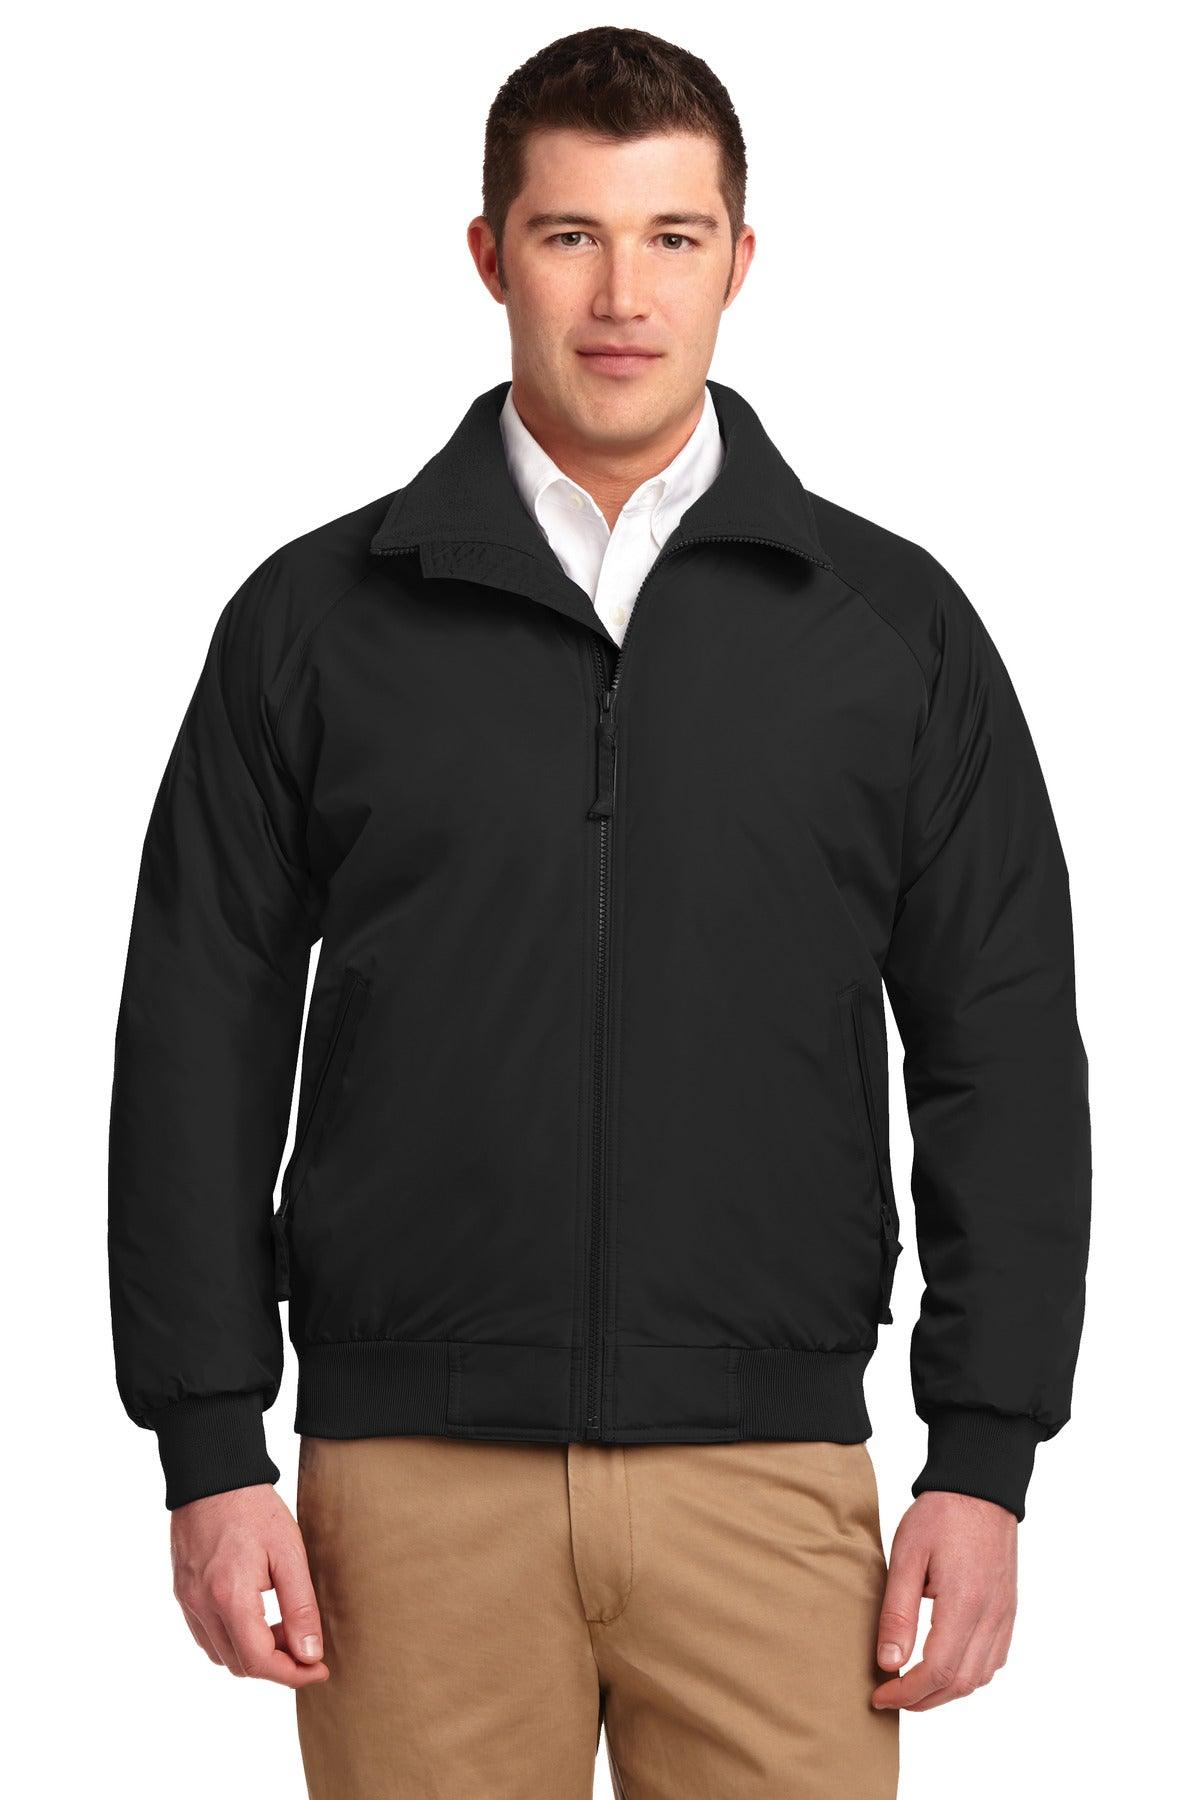 Port Authority Tall Challenger Jacket. TLJ754 - Dresses Max